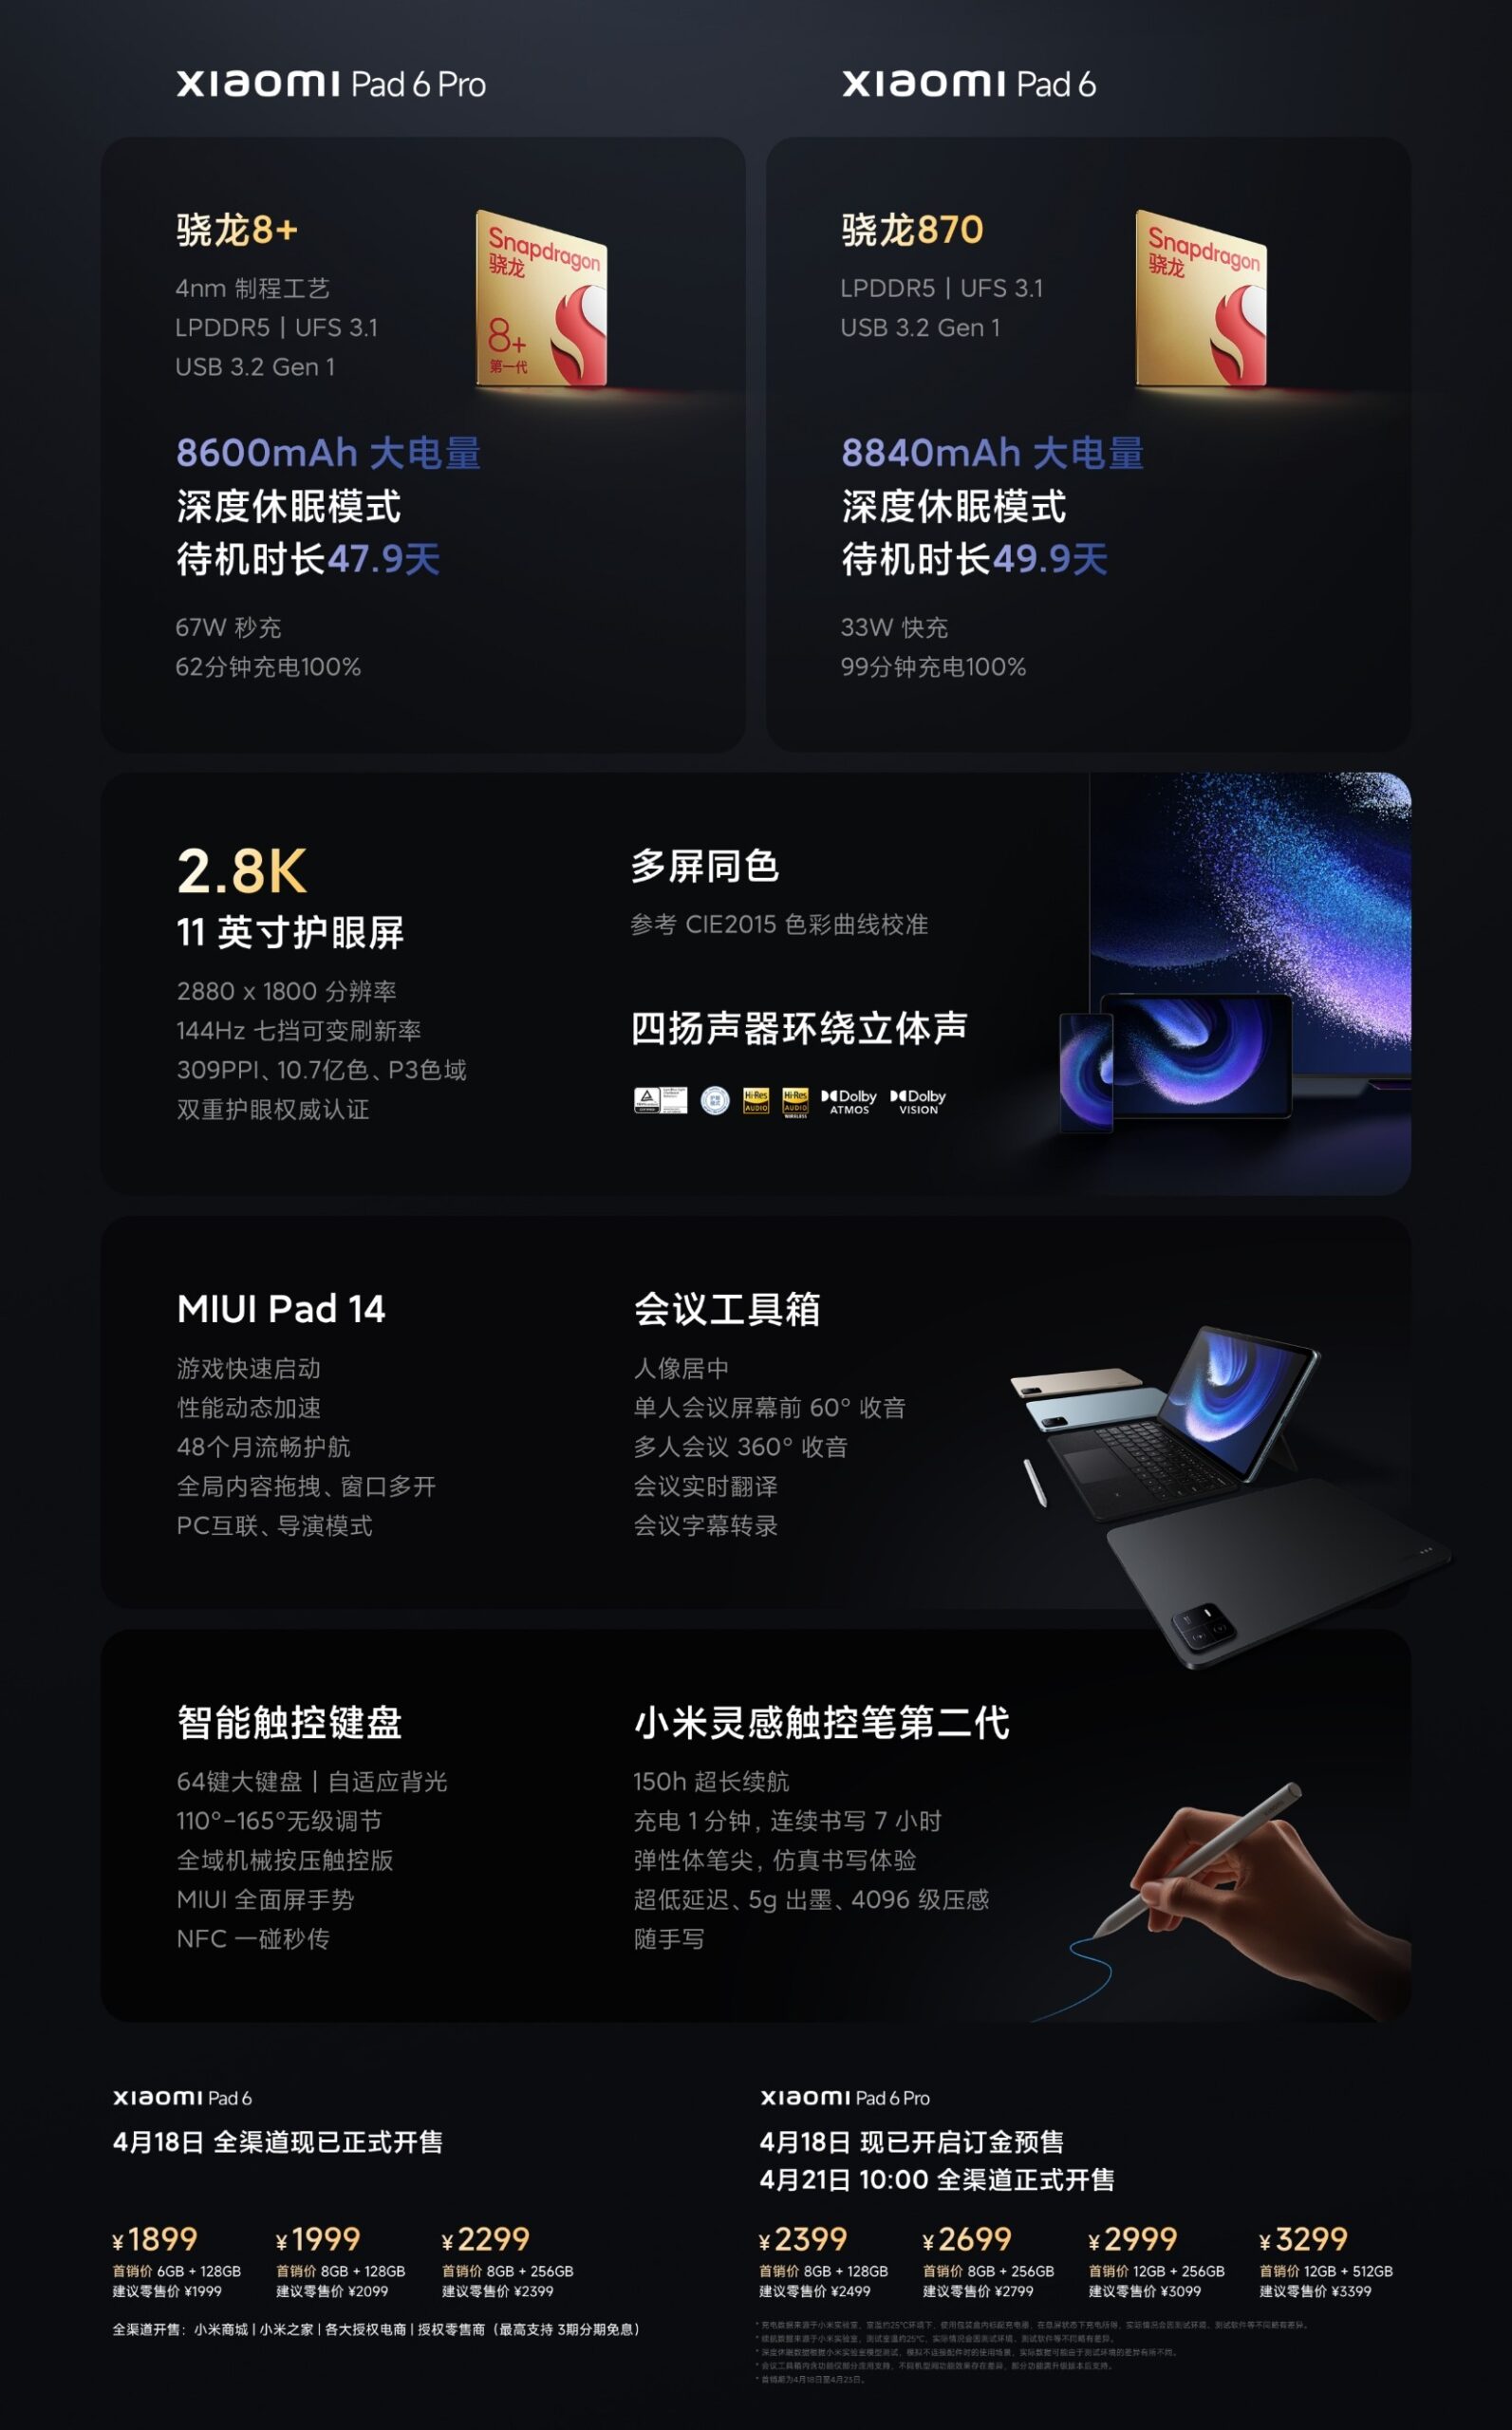 xiaomi launches pad 6 and pad 6 pro - the go android